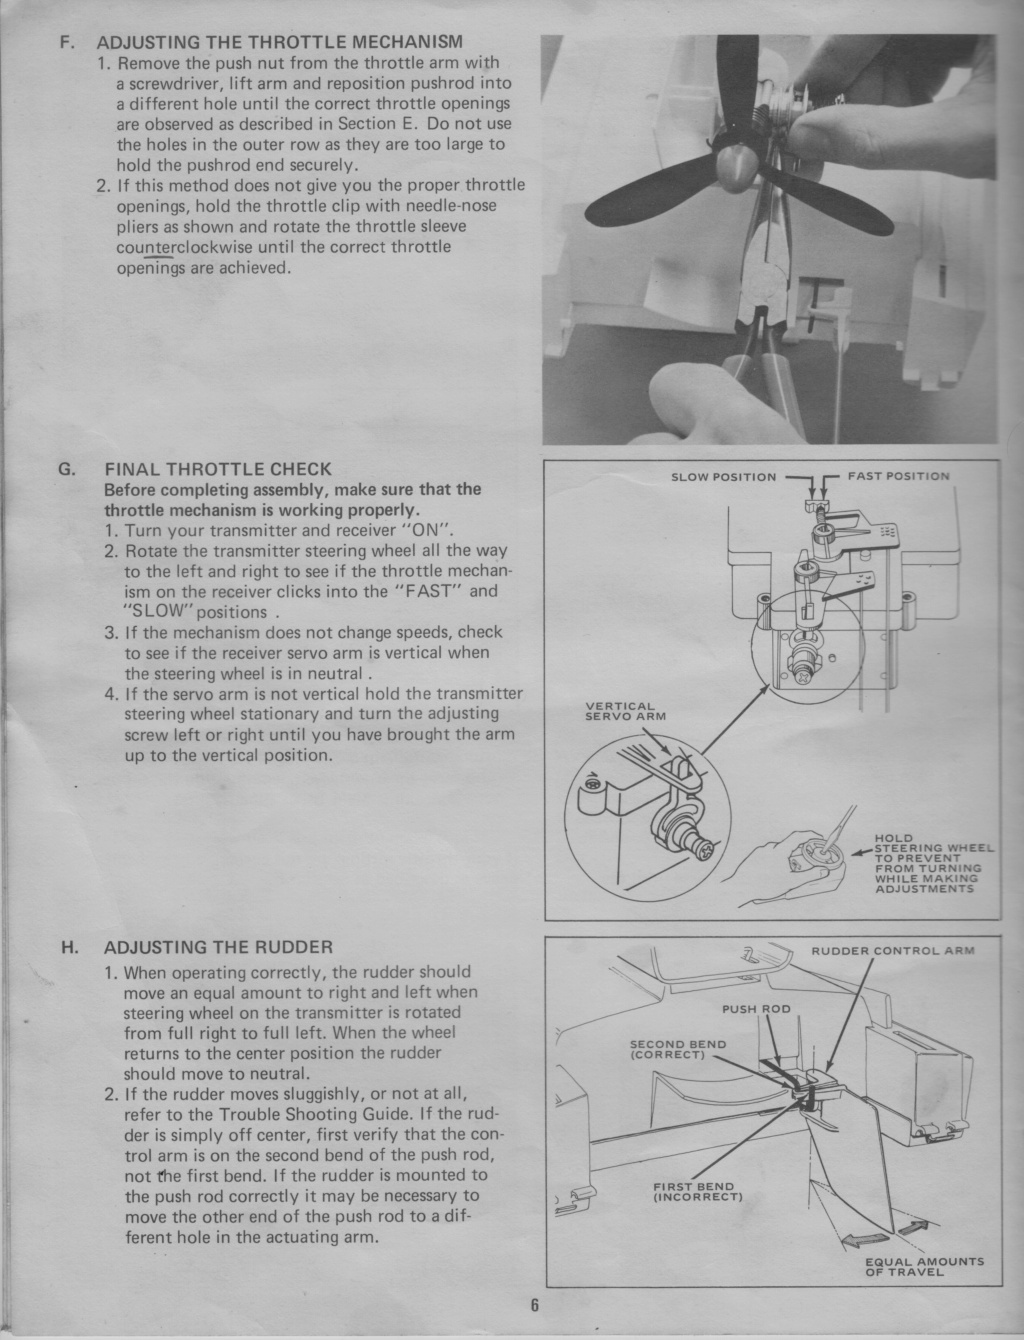 Hydro Blaster pictures and manual scans . Hydro_13